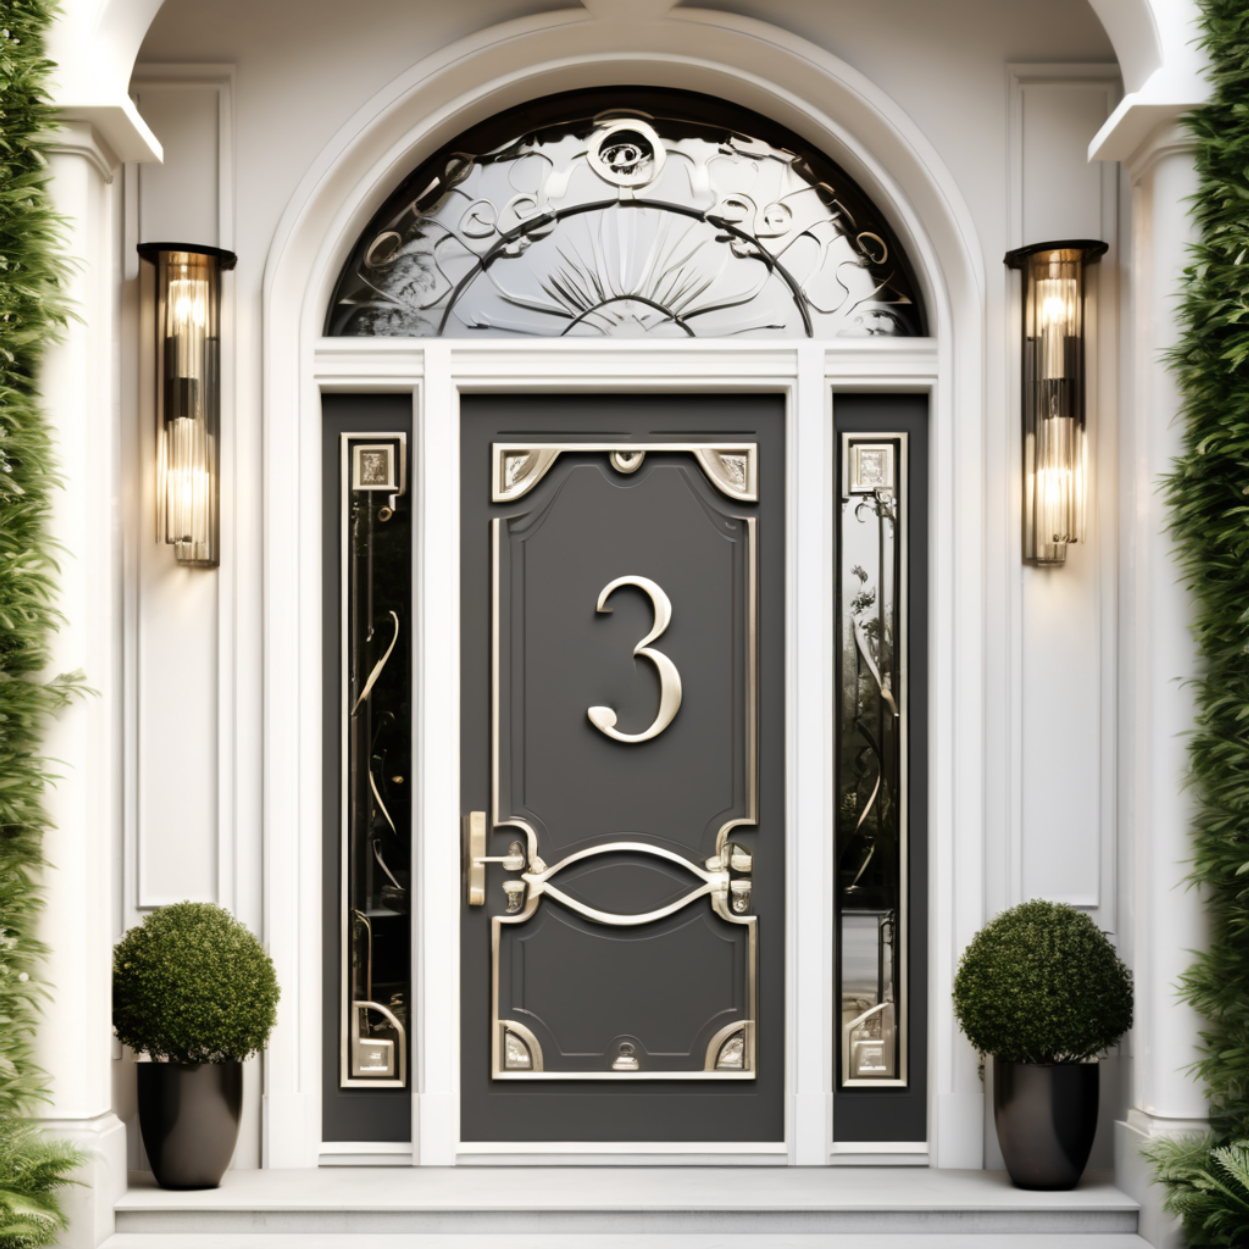 What to Consider When Looking for House Door Numbers